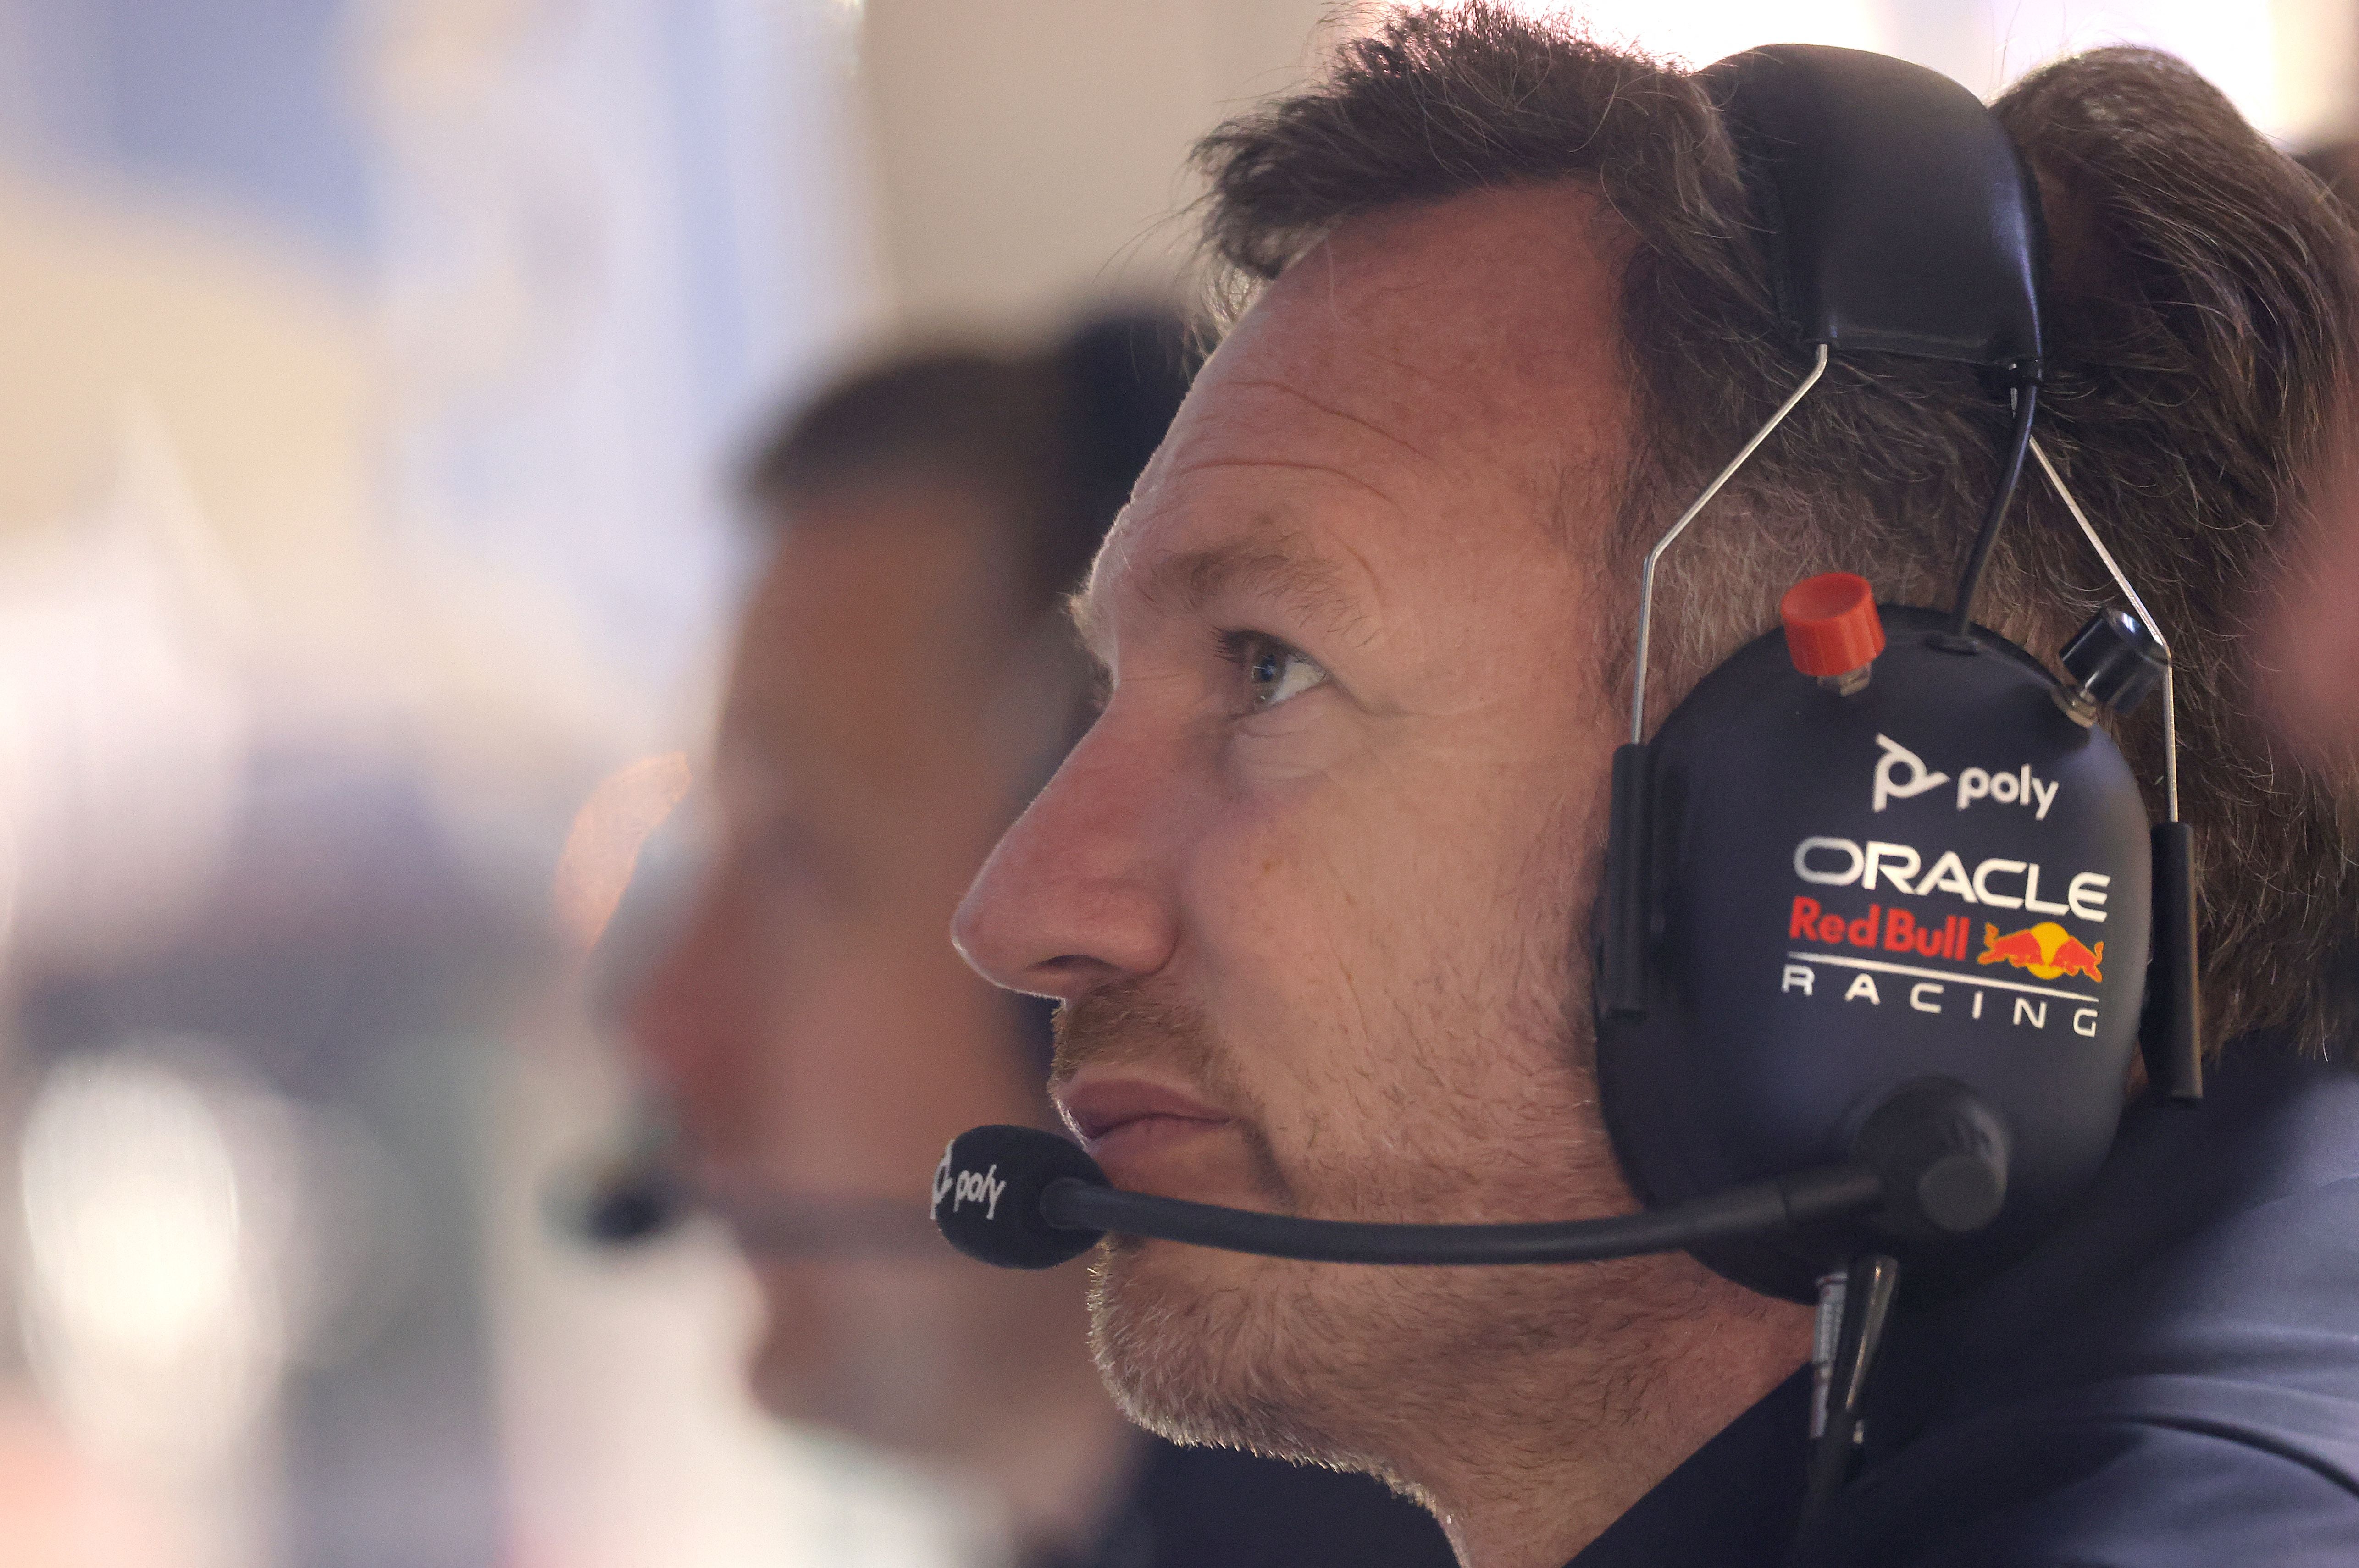 Christian Horner’s team had problems of their own